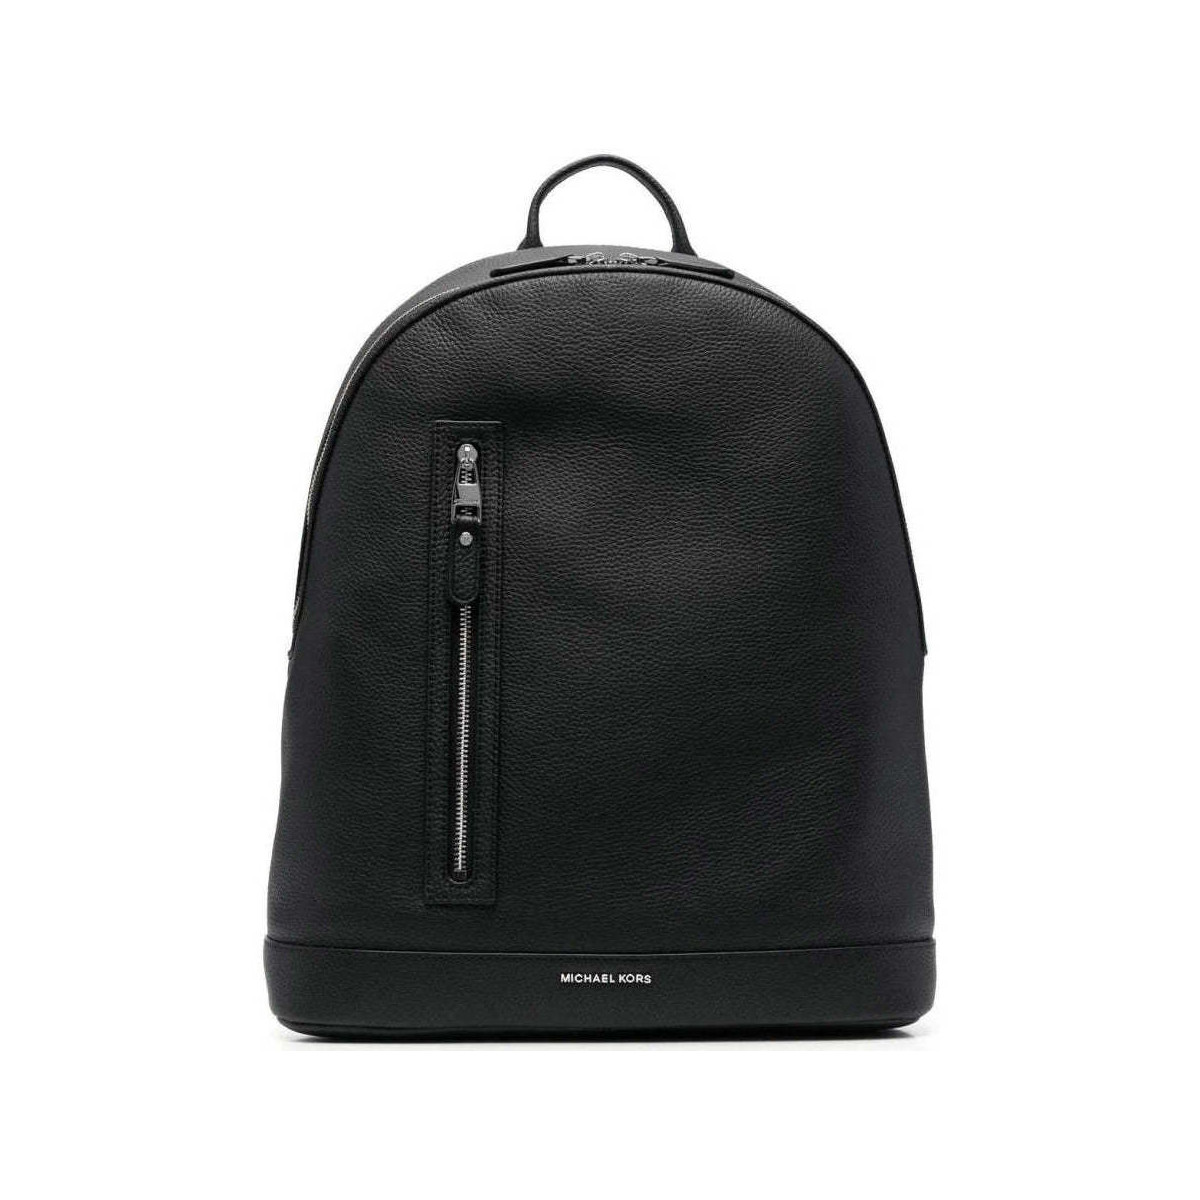 Sacs Homme Wincraft Backpack GIOSEPPO Milna 67240 Black slim commuter Wincraft backpack Noir